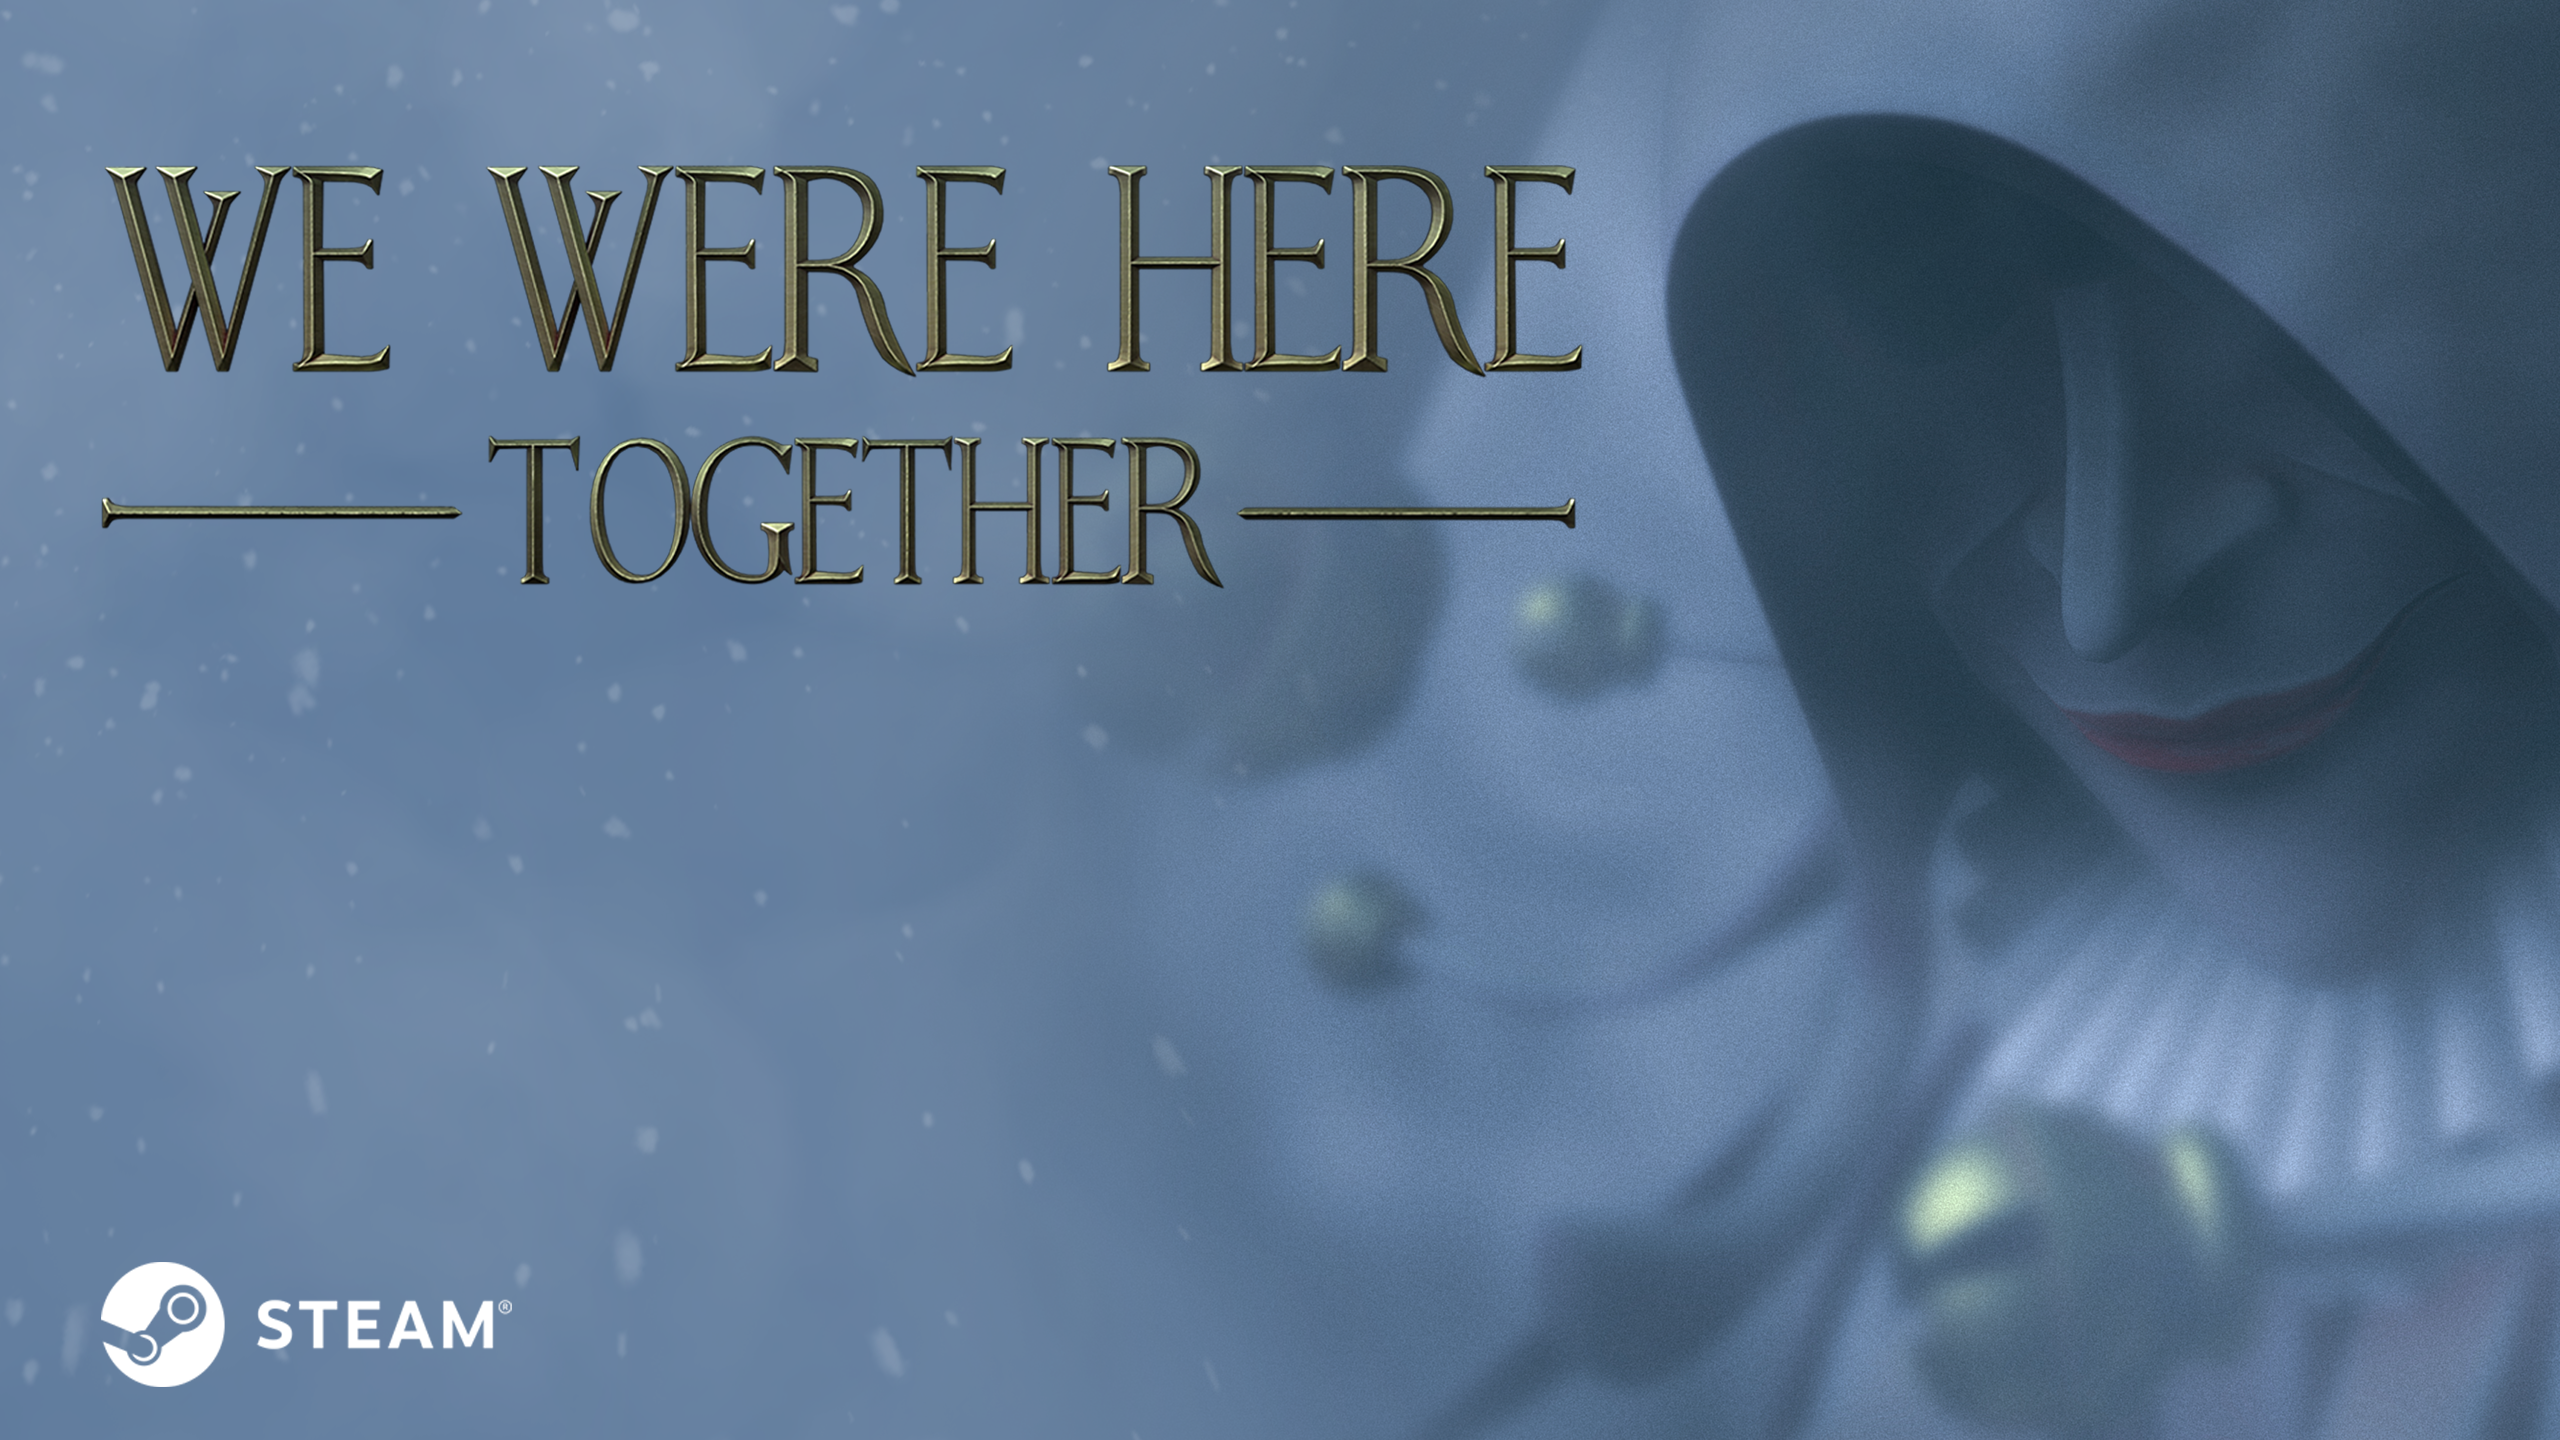 download free we were here together coop